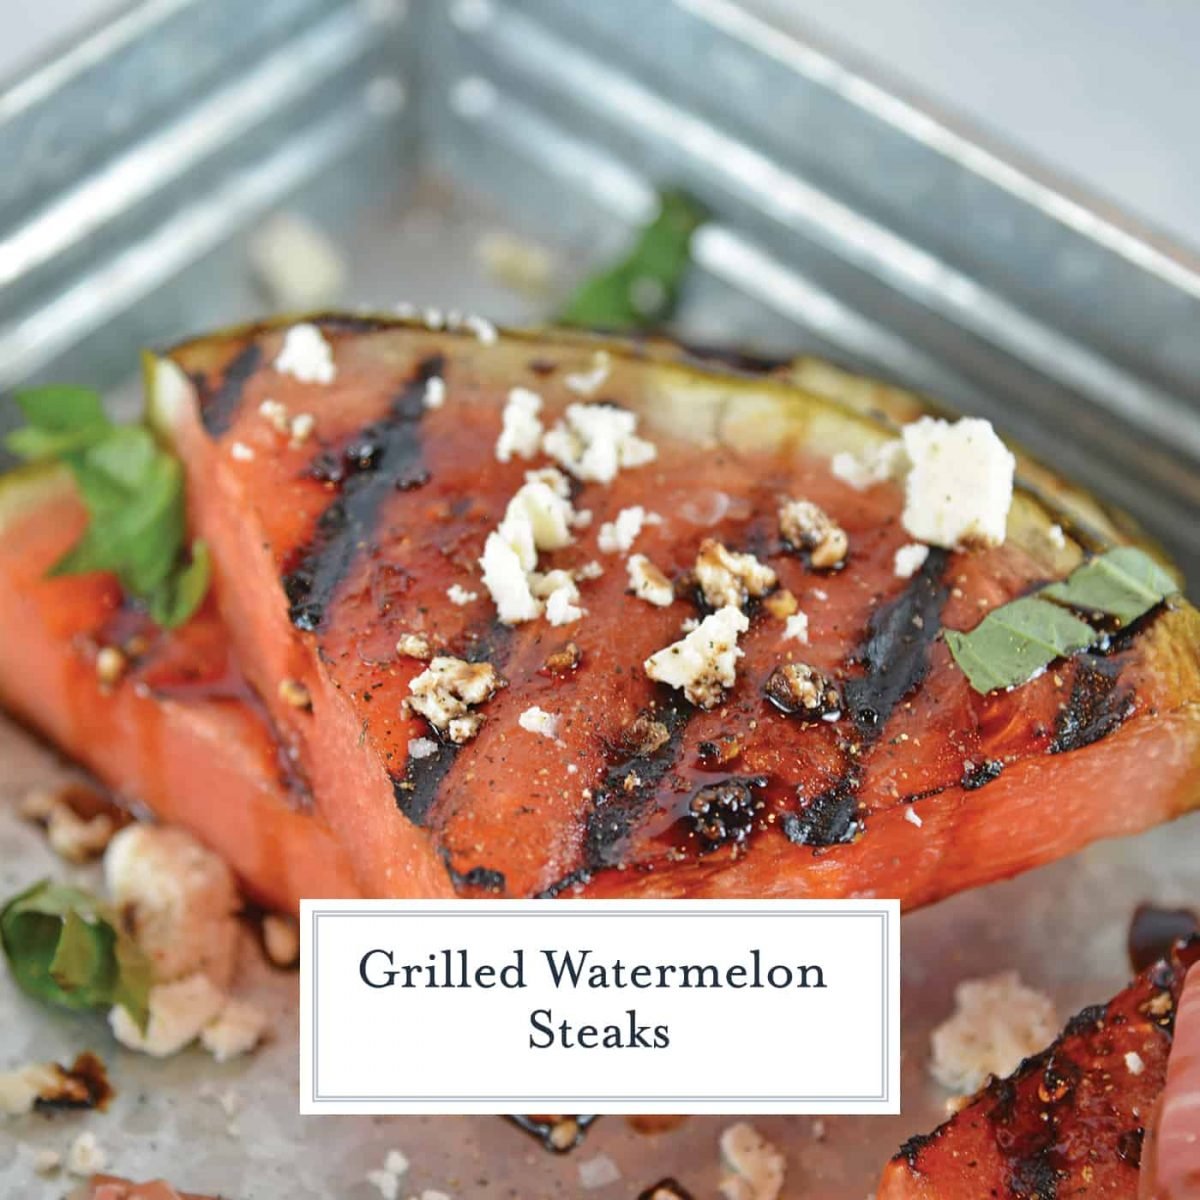 Grilled Watermelon Steaks with balsamic reduction and feta cheese are an easy BBQ side dish. Caramelized, juicy watermelon with savory cheese and sticky reduction is delicious! #grilledwatermelon #watermelonrecipes www.savoryexperiments.com